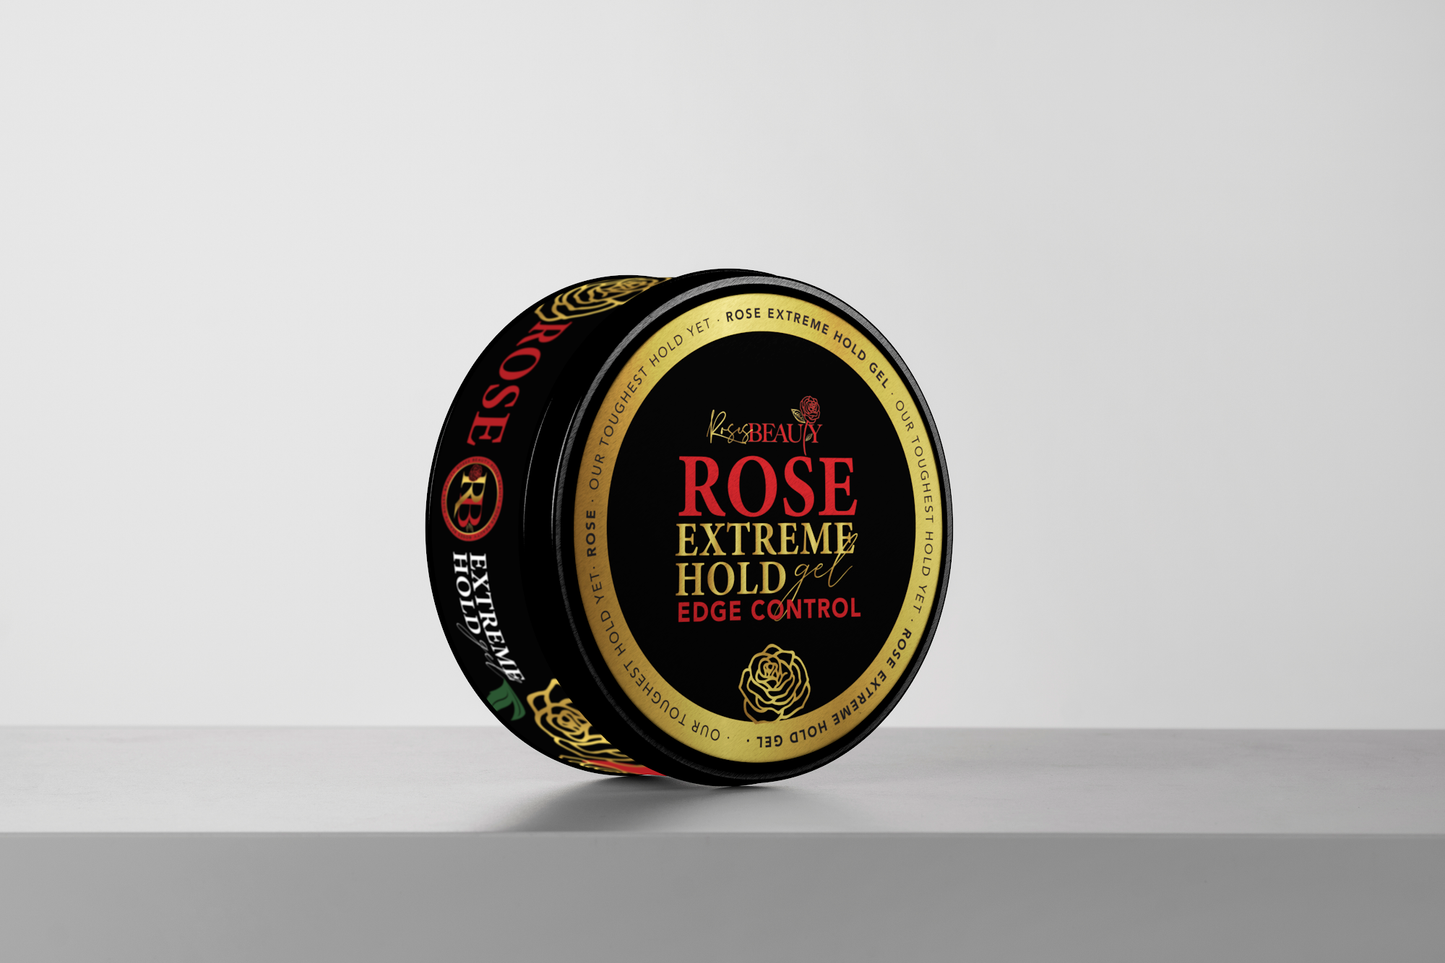 Rose Extreme Hold (edge control)